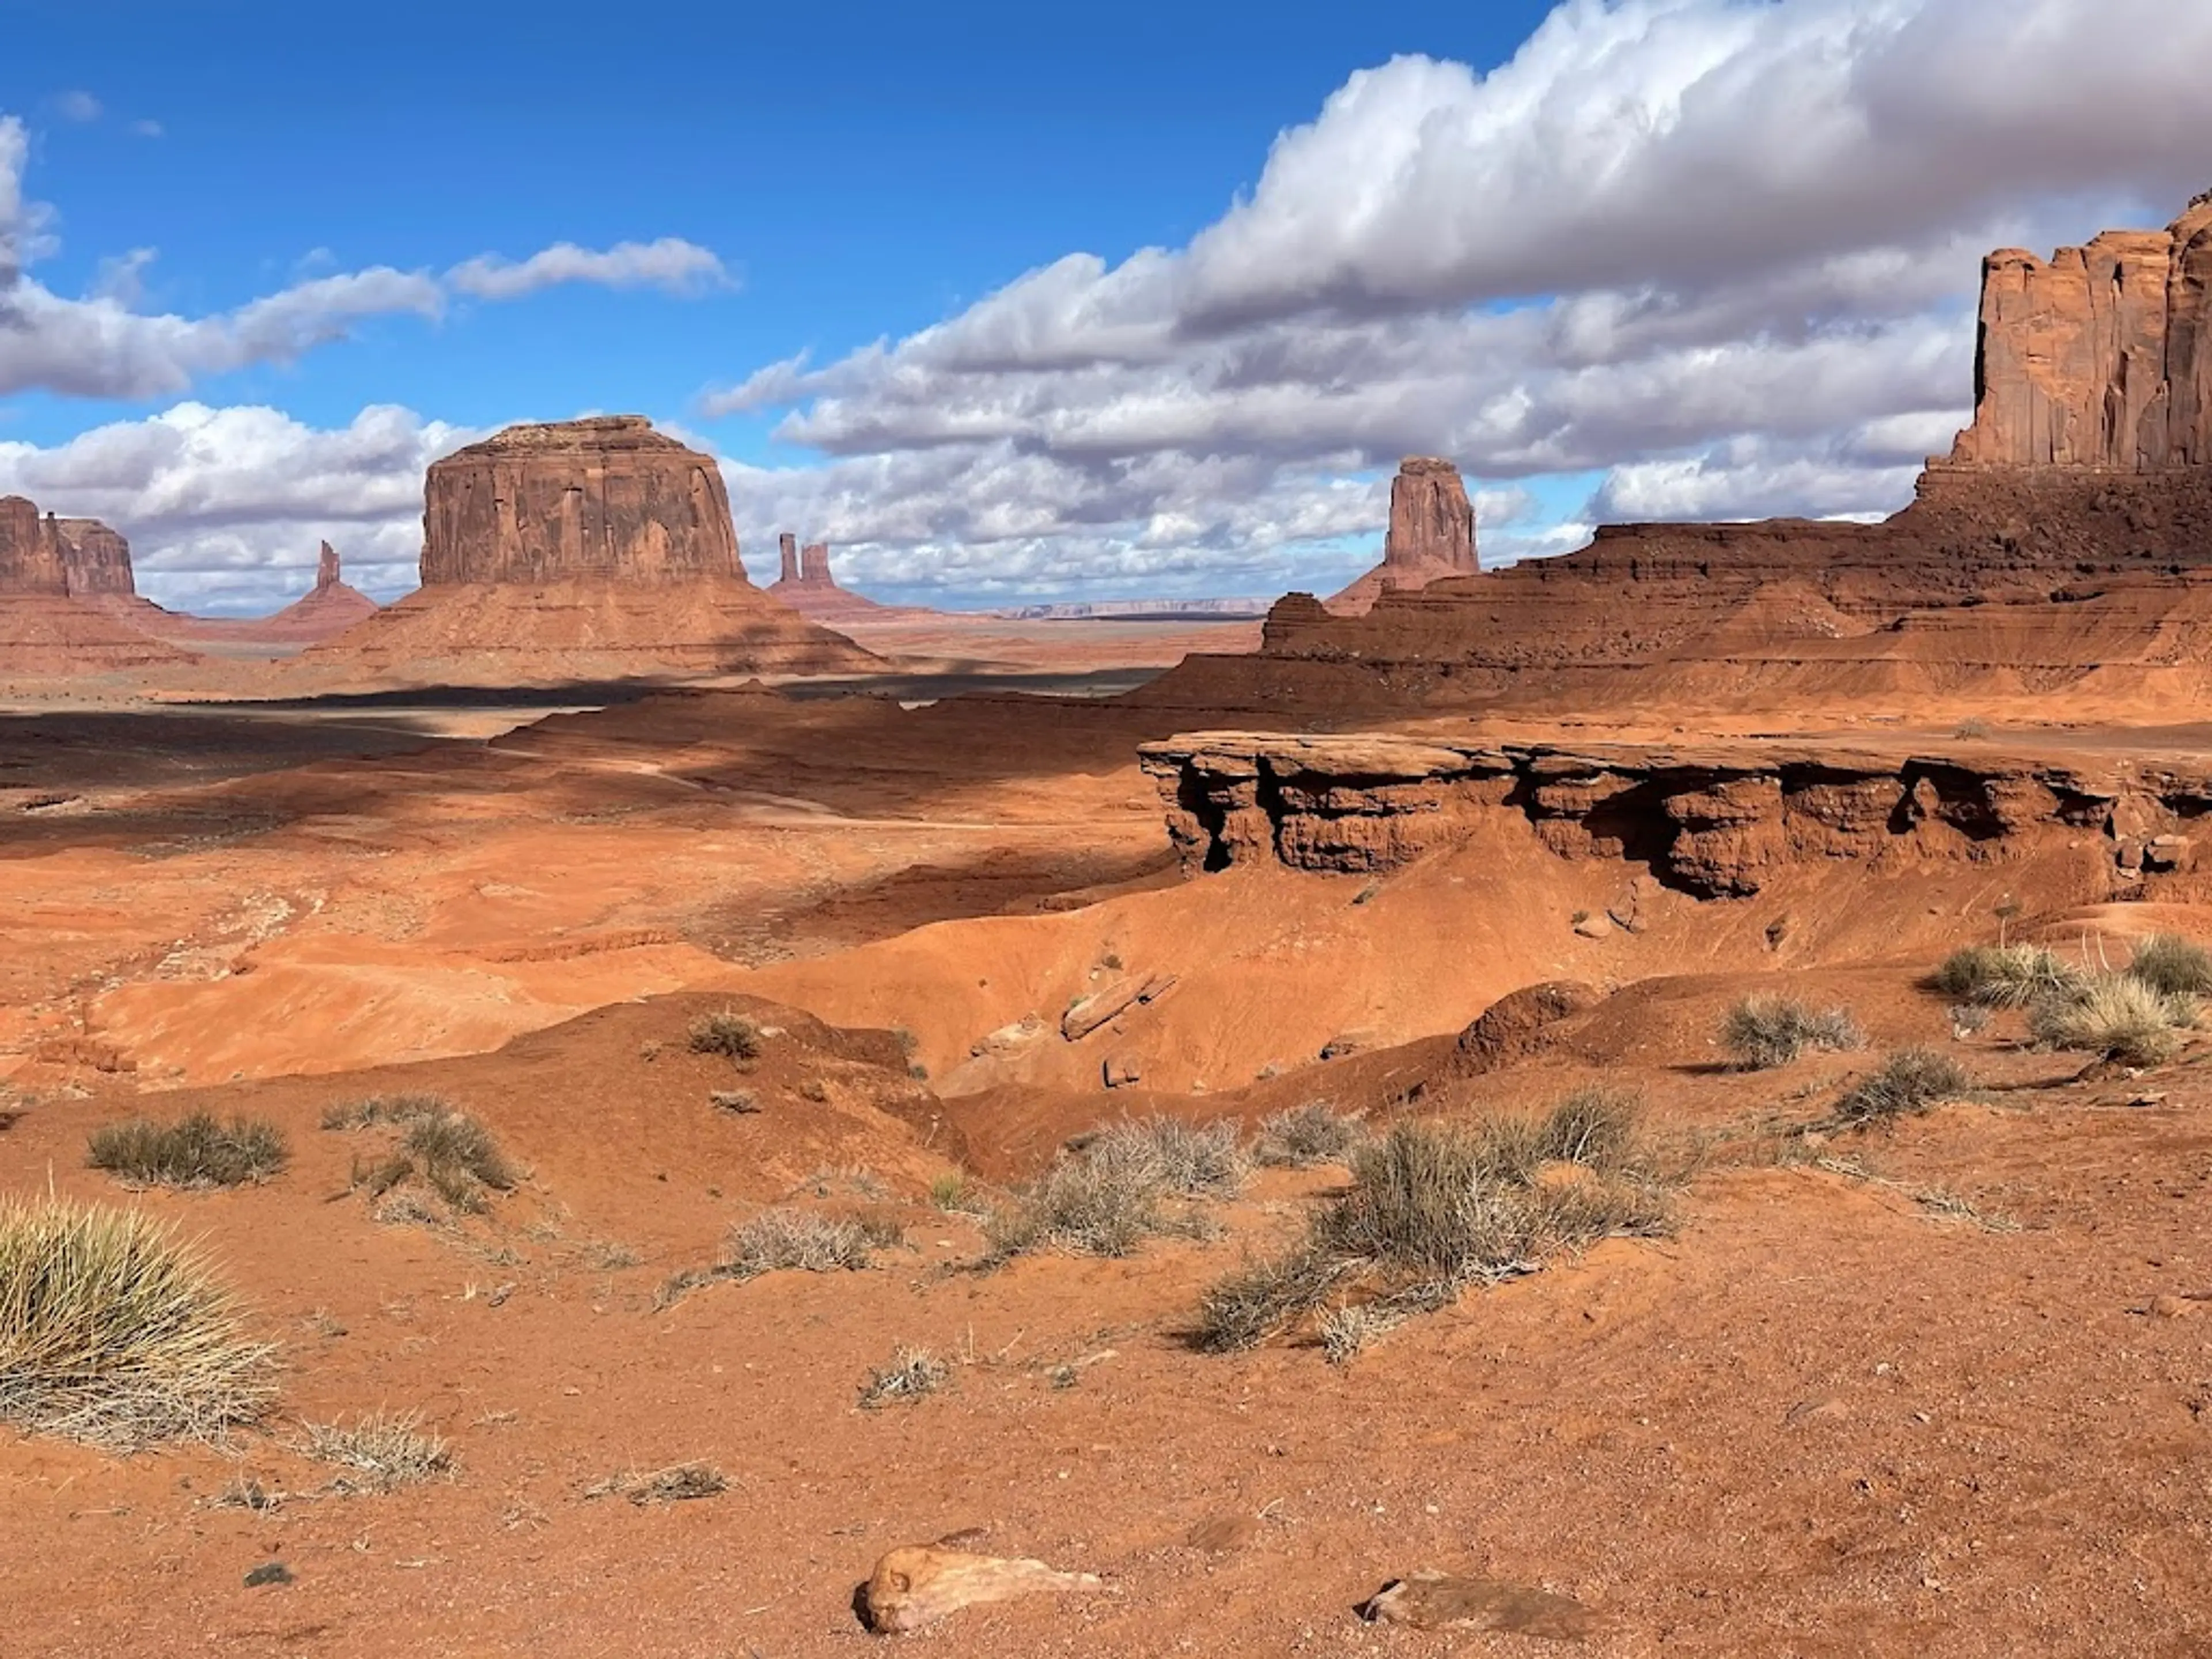 Guided tour of the Monument Valley Navajo Tribal Park